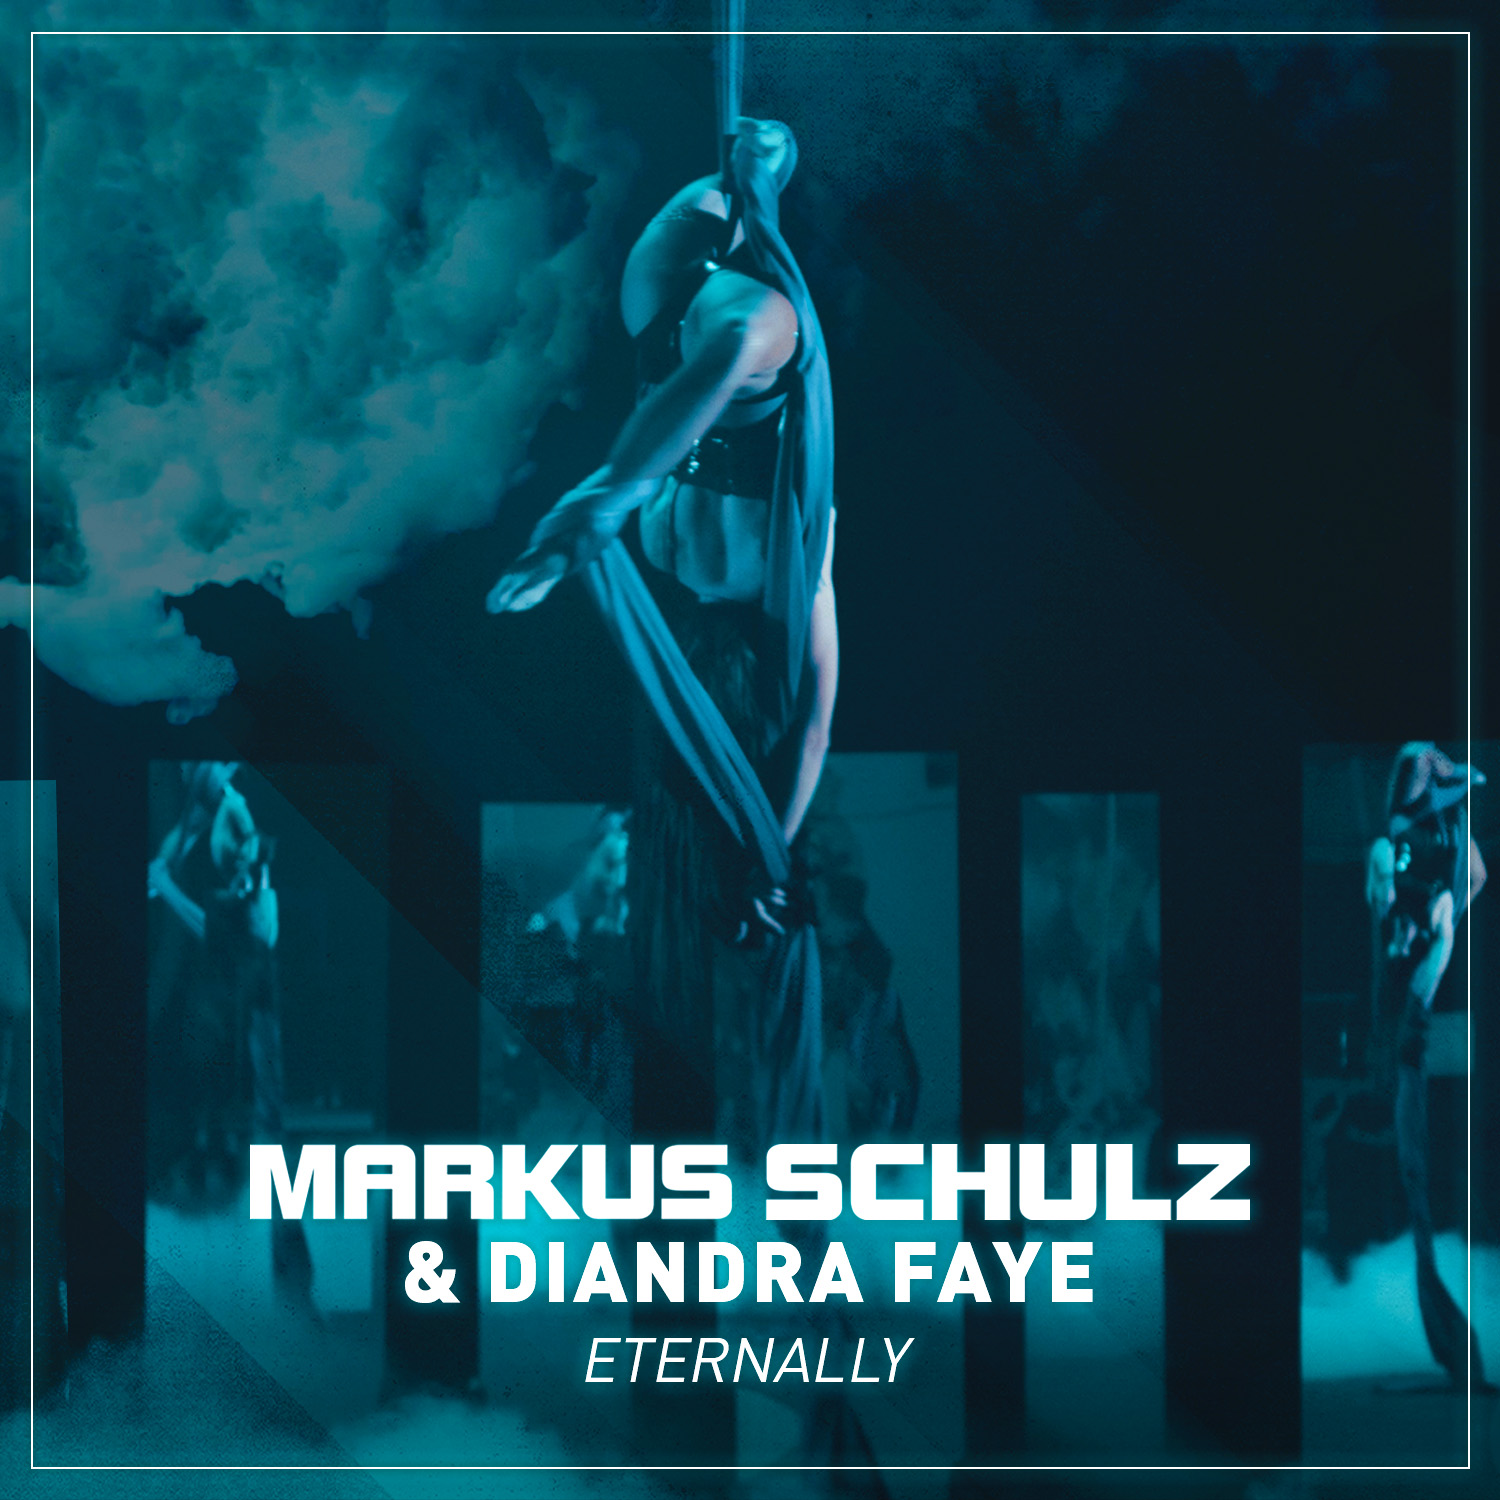 MARKUS SCHULZ featuring DIANDRA FAYE, "Eternally" (Coldharbour | Black Hole Recordings), song artwork